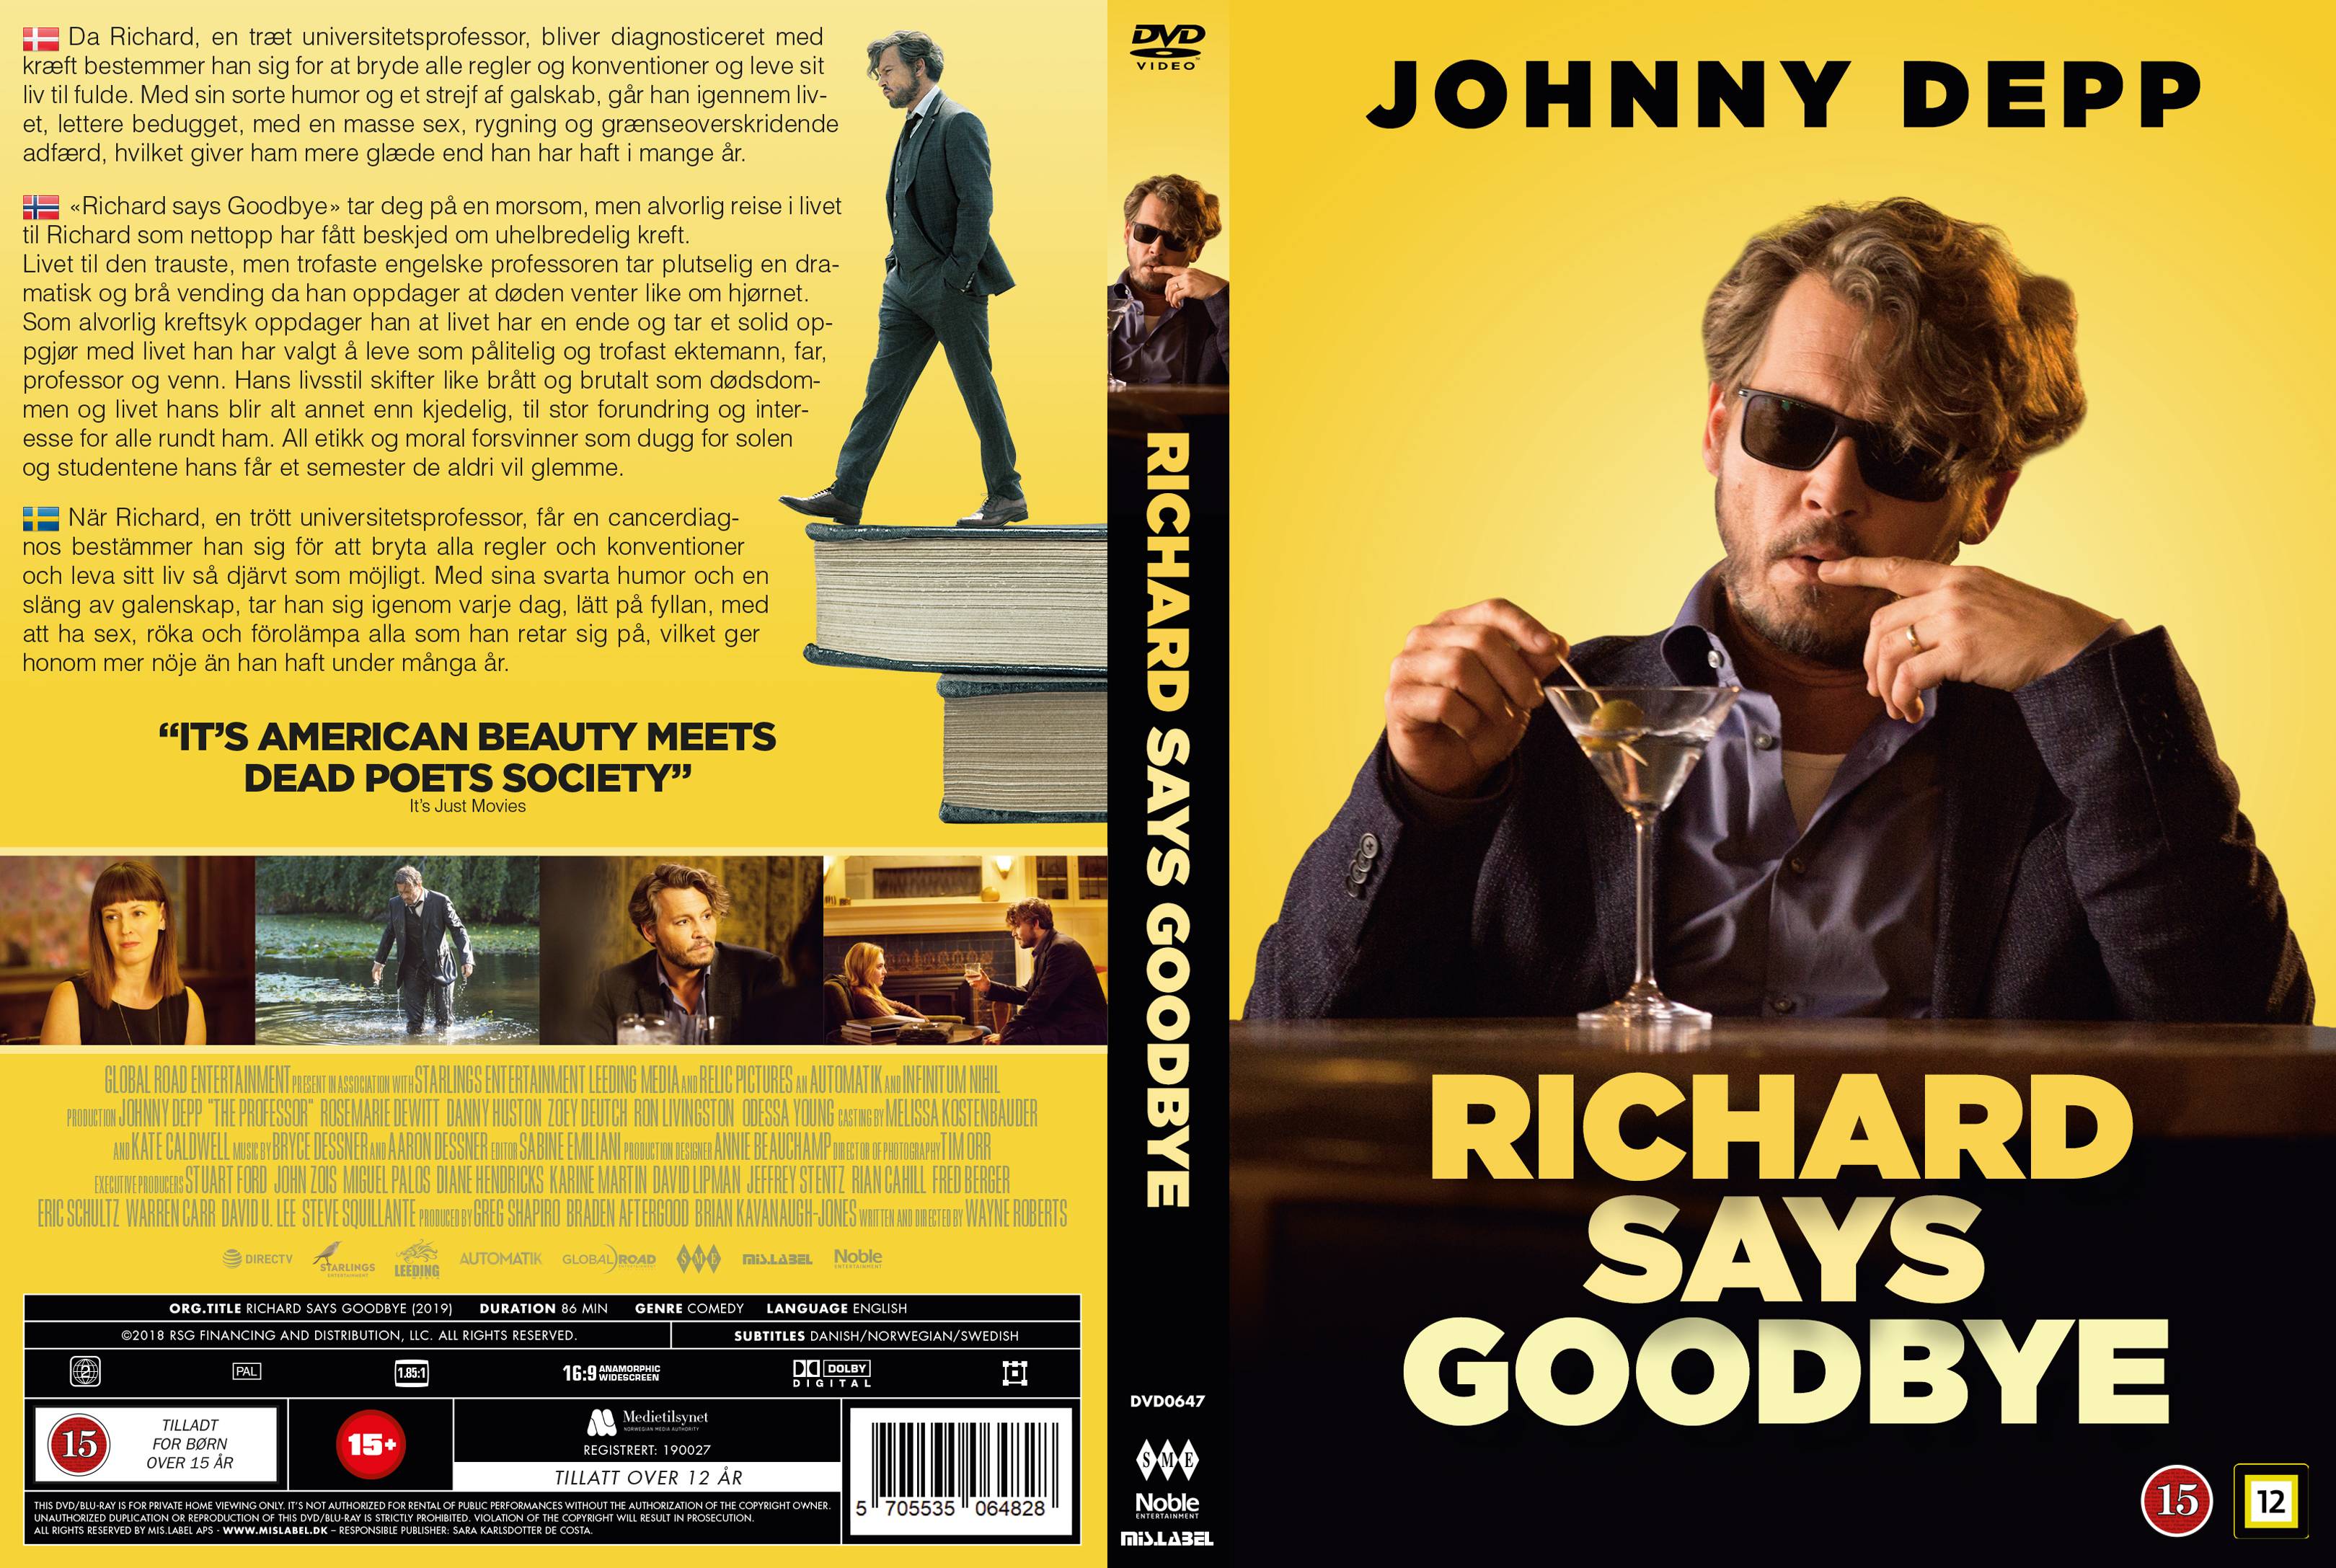 Richard Says Goodbye Front Dvd Covers Cover Century Over 500 000 Album Art Covers For Free